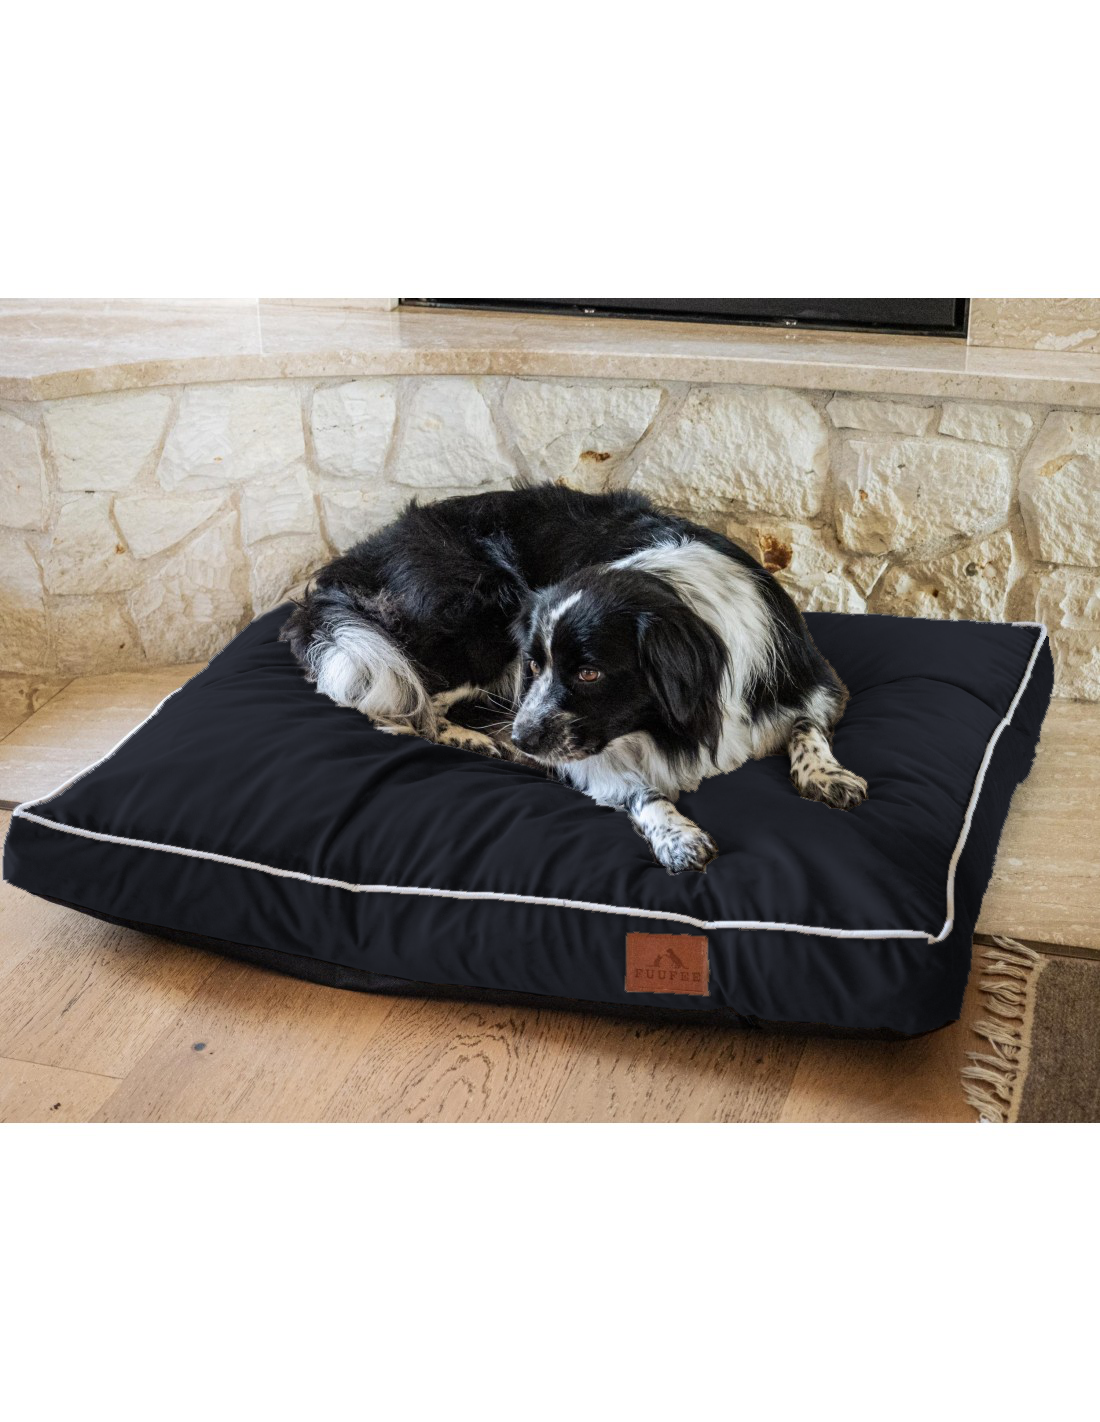 CUSHION/KENNEL/MATTRESS for indoor and outdoor PERRO dogs - Handmade by professional craftsmen.